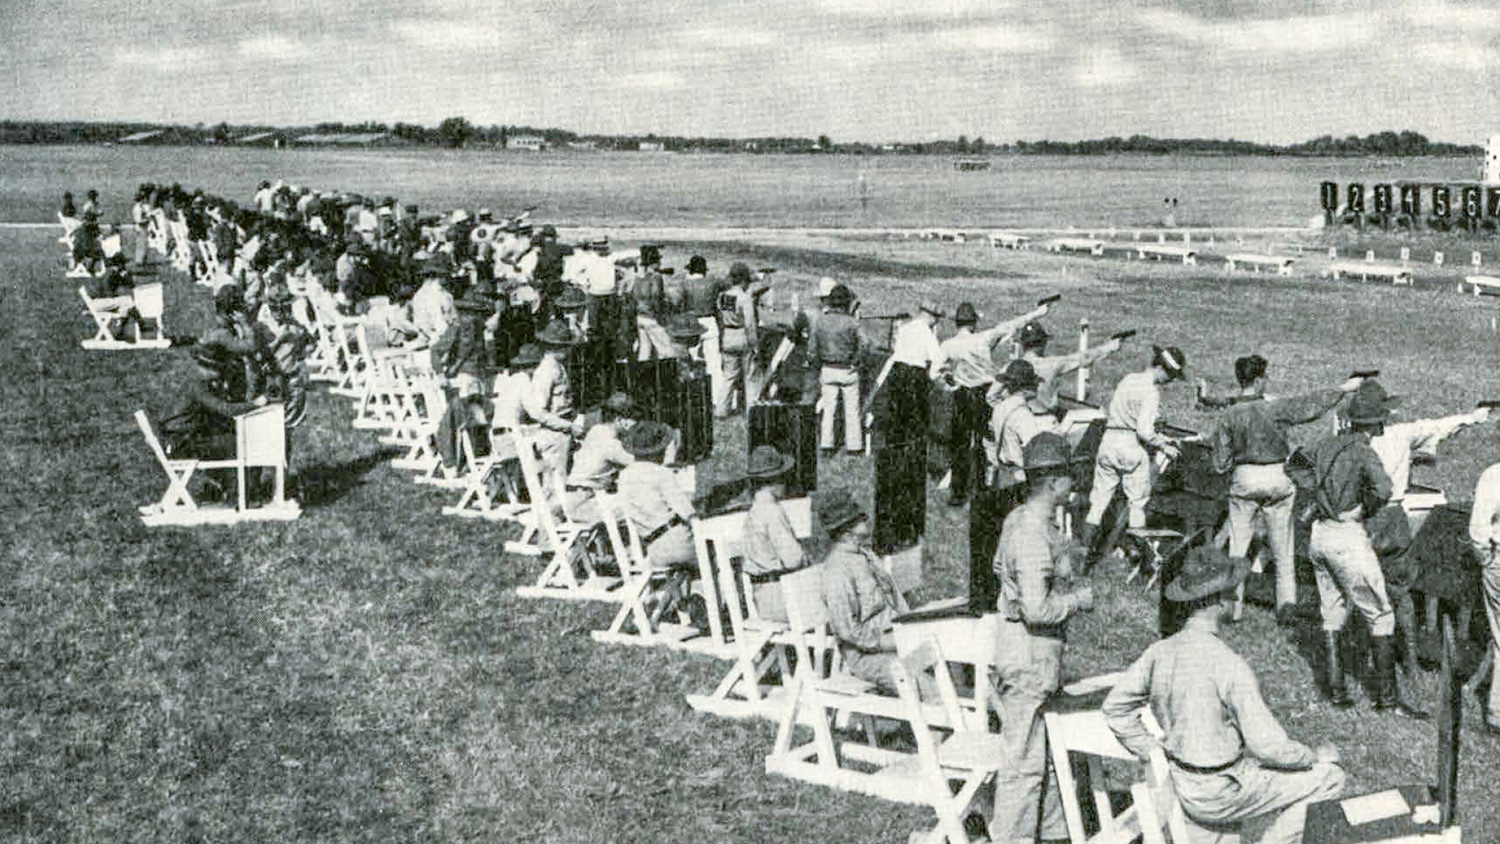 1937 Pistol Nationals at Camp Perry.